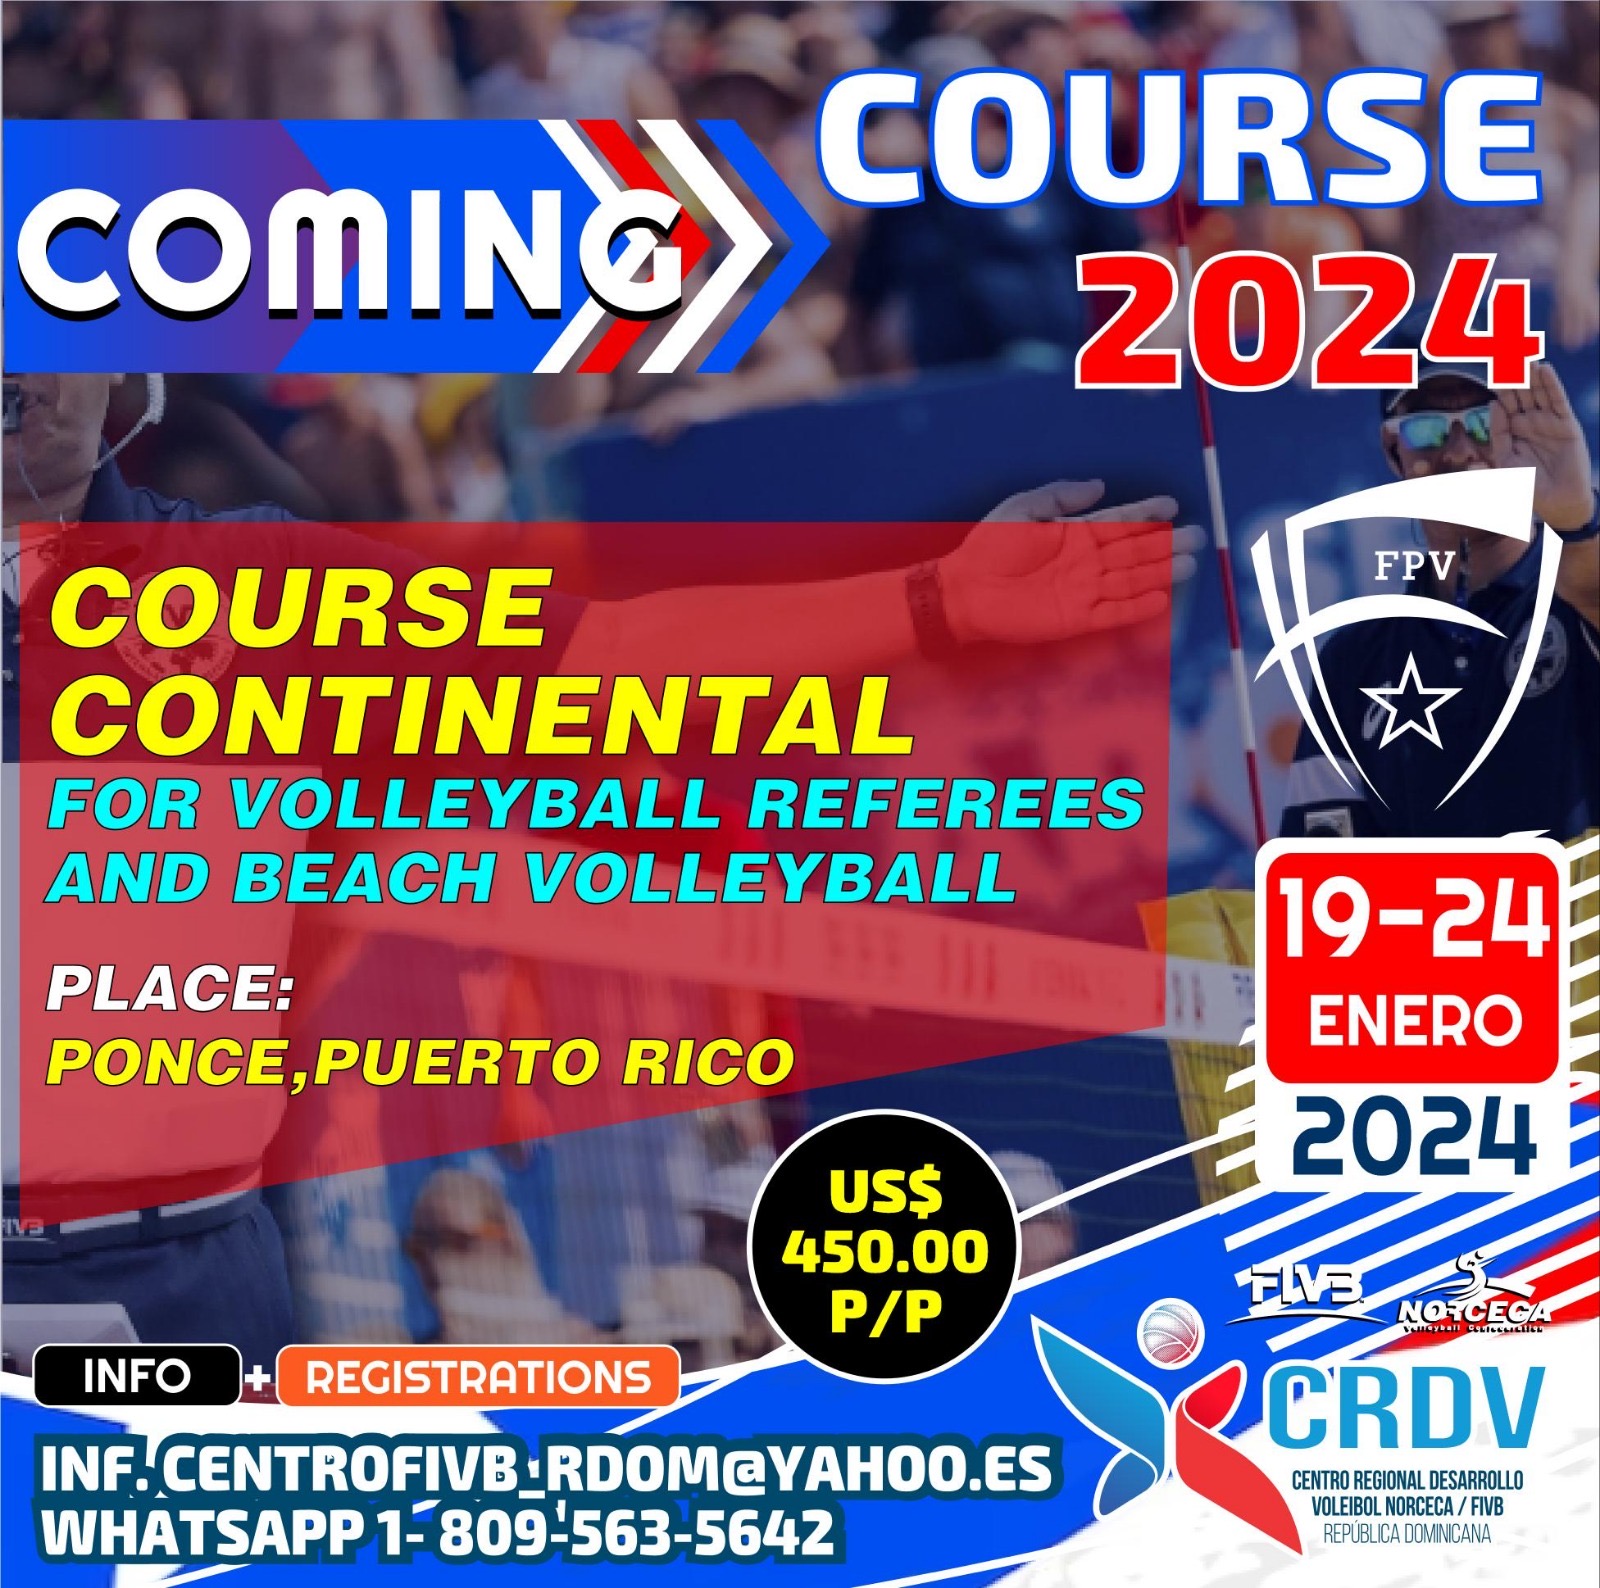 Soon Continental Volleyball and Beach Volleyball Refereeing Course